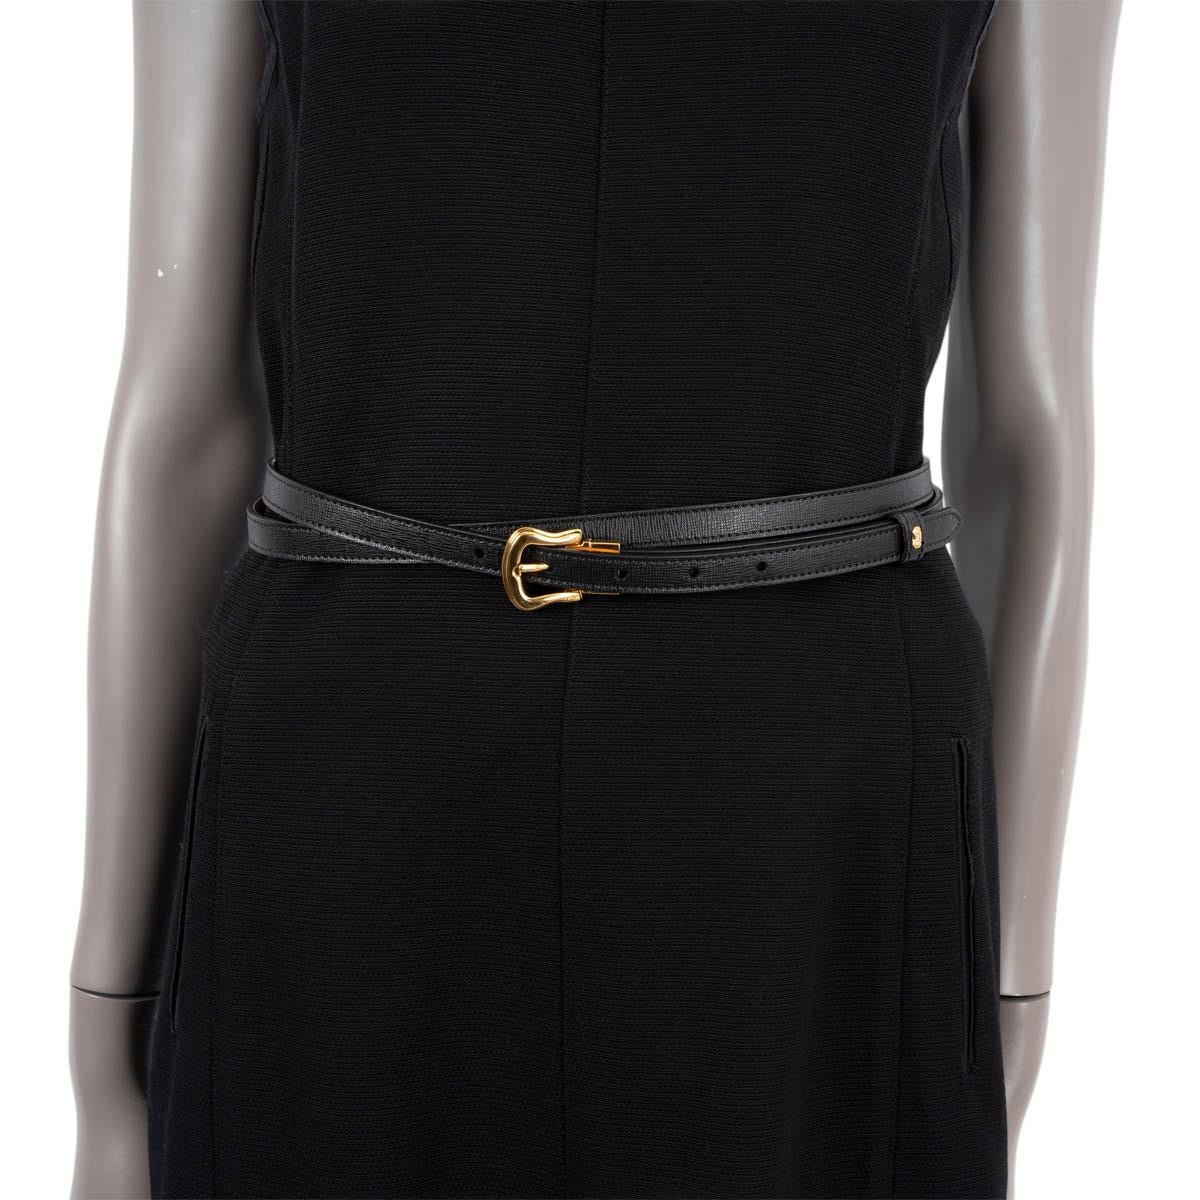 FENDI pink & black leather DOUBLE WRAP REVERSIBLE SKINNY WAIST Belt 75 In Excellent Condition For Sale In Zürich, CH